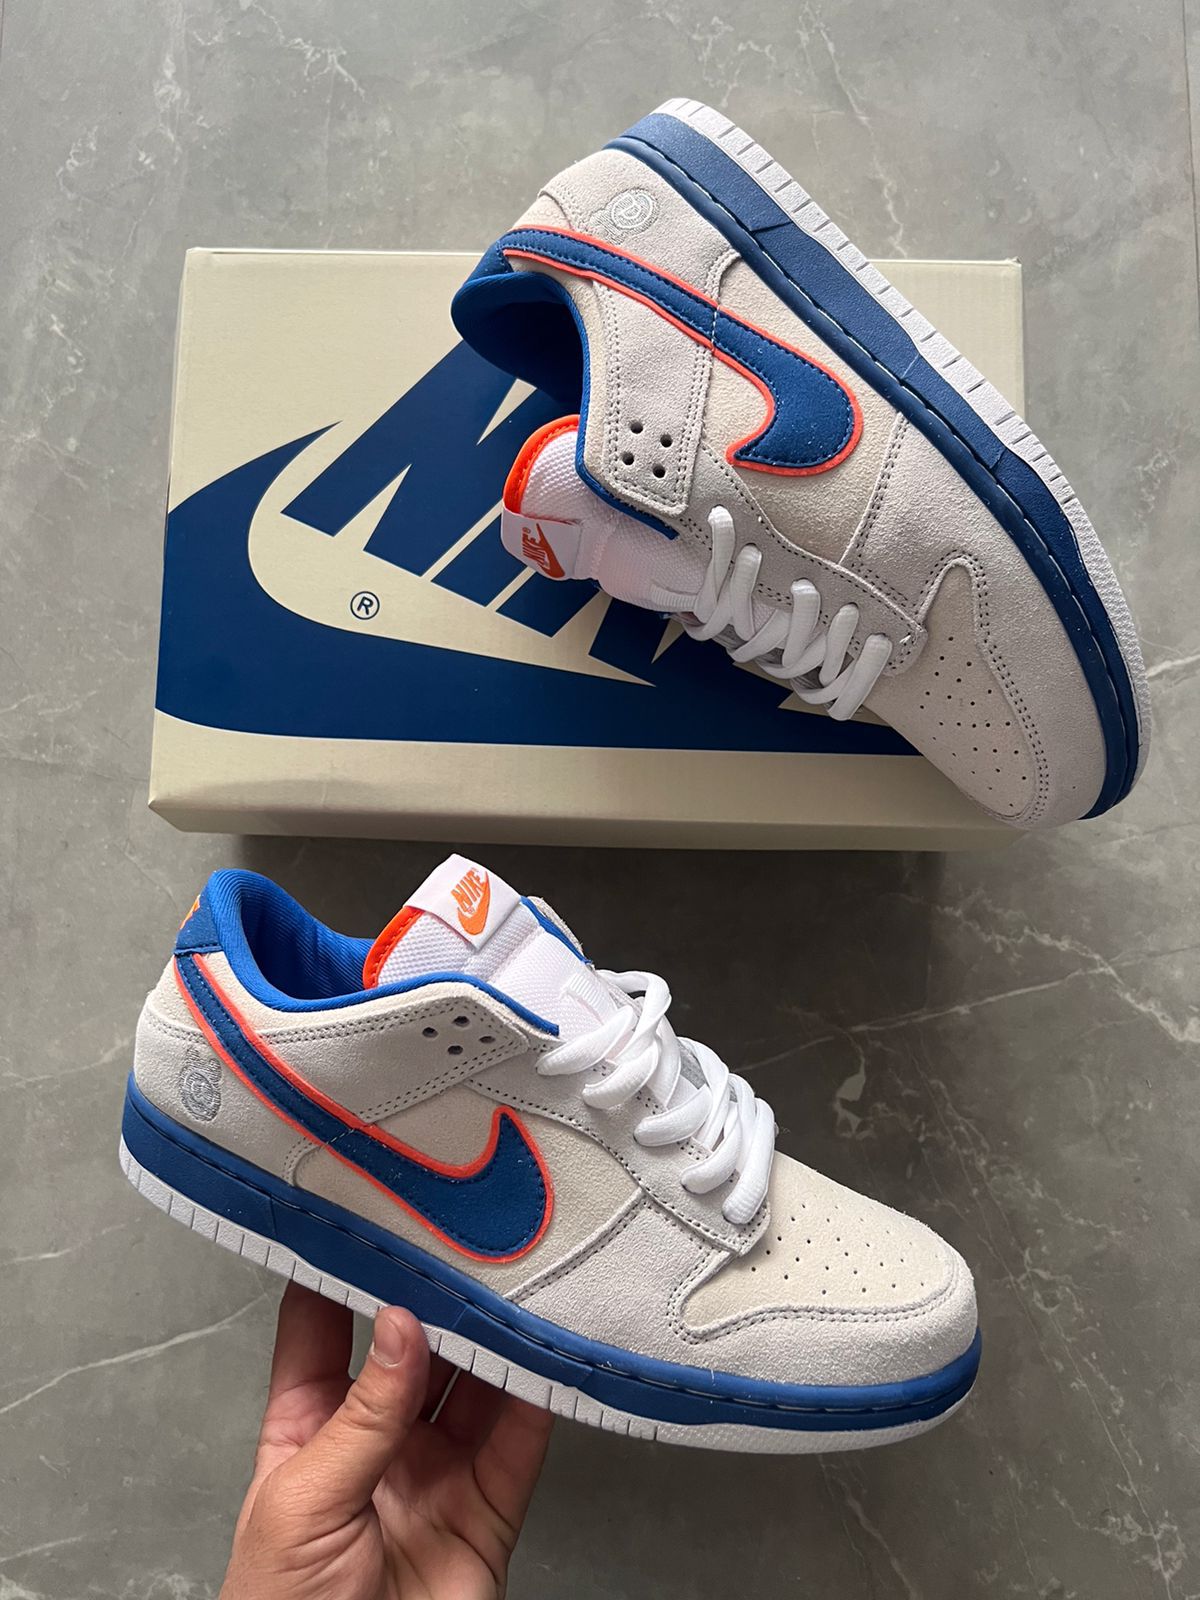 Imported Dunk Cool Blue Sneakers